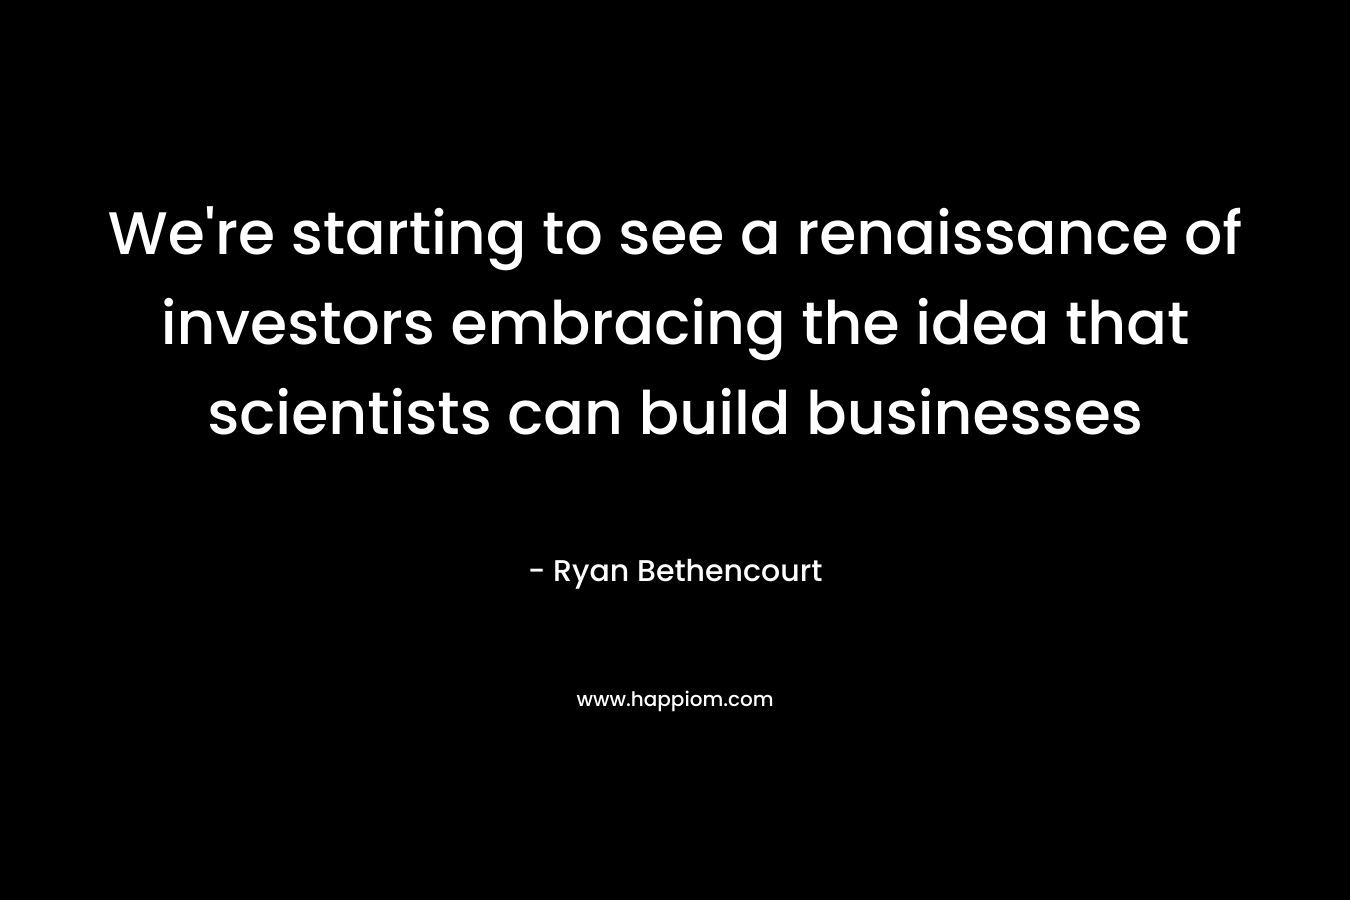 We’re starting to see a renaissance of investors embracing the idea that scientists can build businesses – Ryan Bethencourt